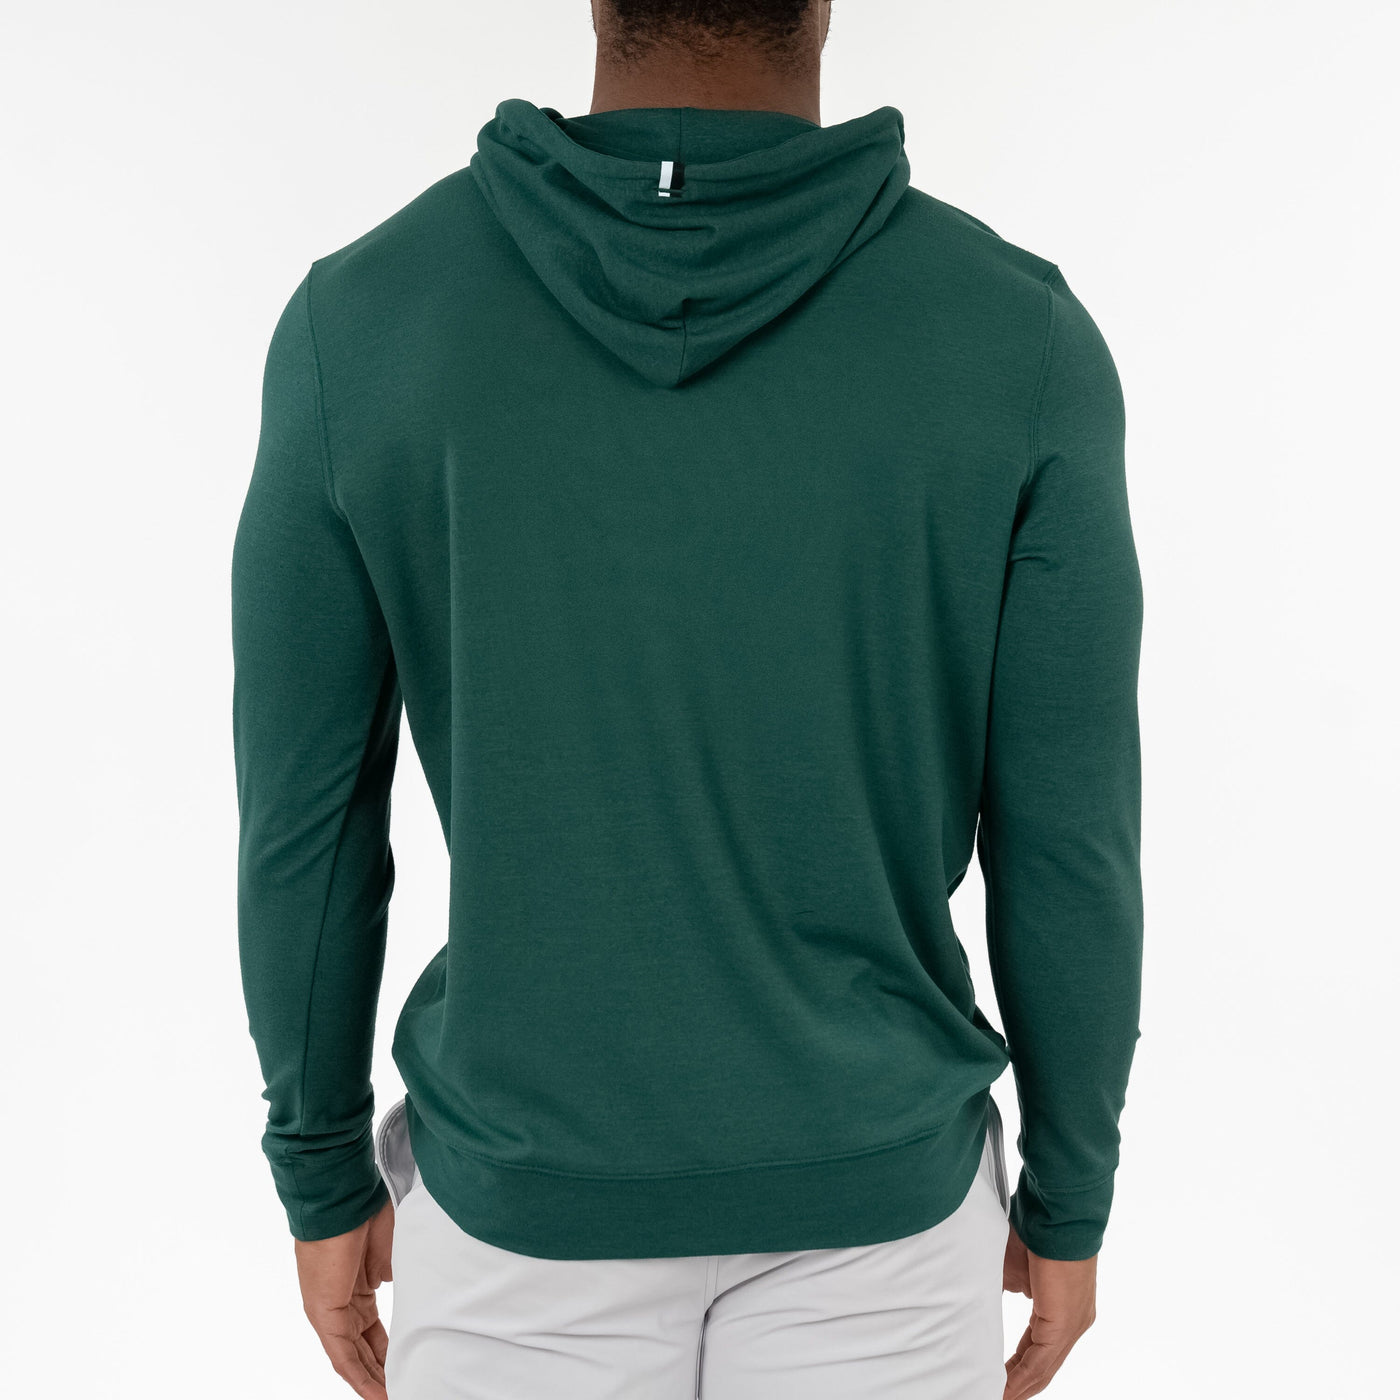 The Point Forward Hoodie